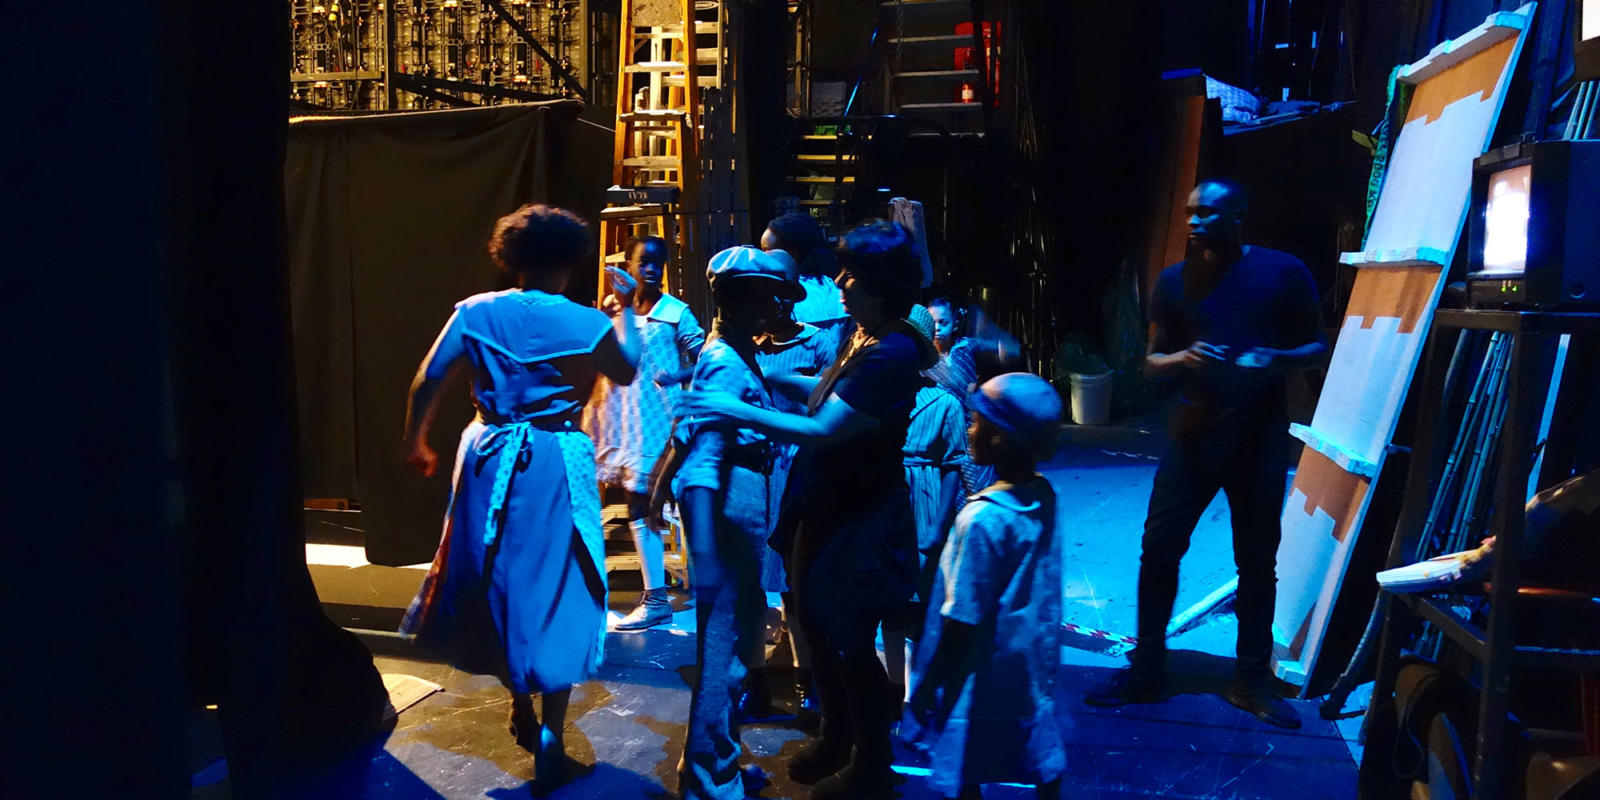 Members of the Children's Chorus play with one another in the wings